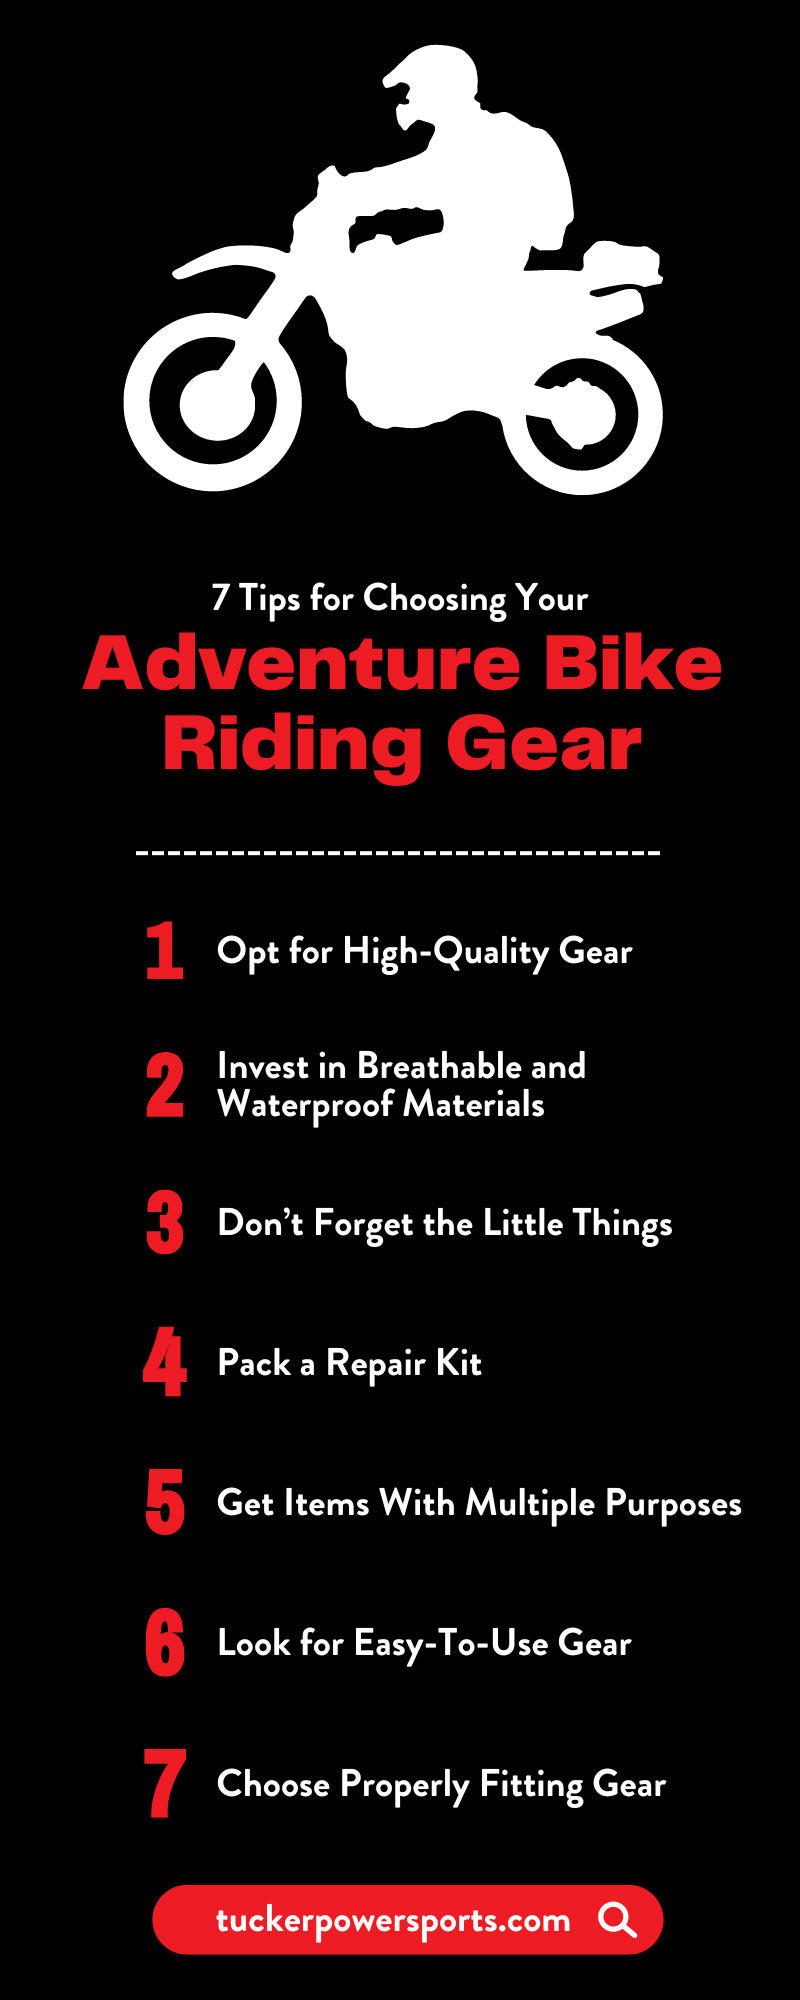 7 Tips for Choosing Your Adventure Bike Riding Gear